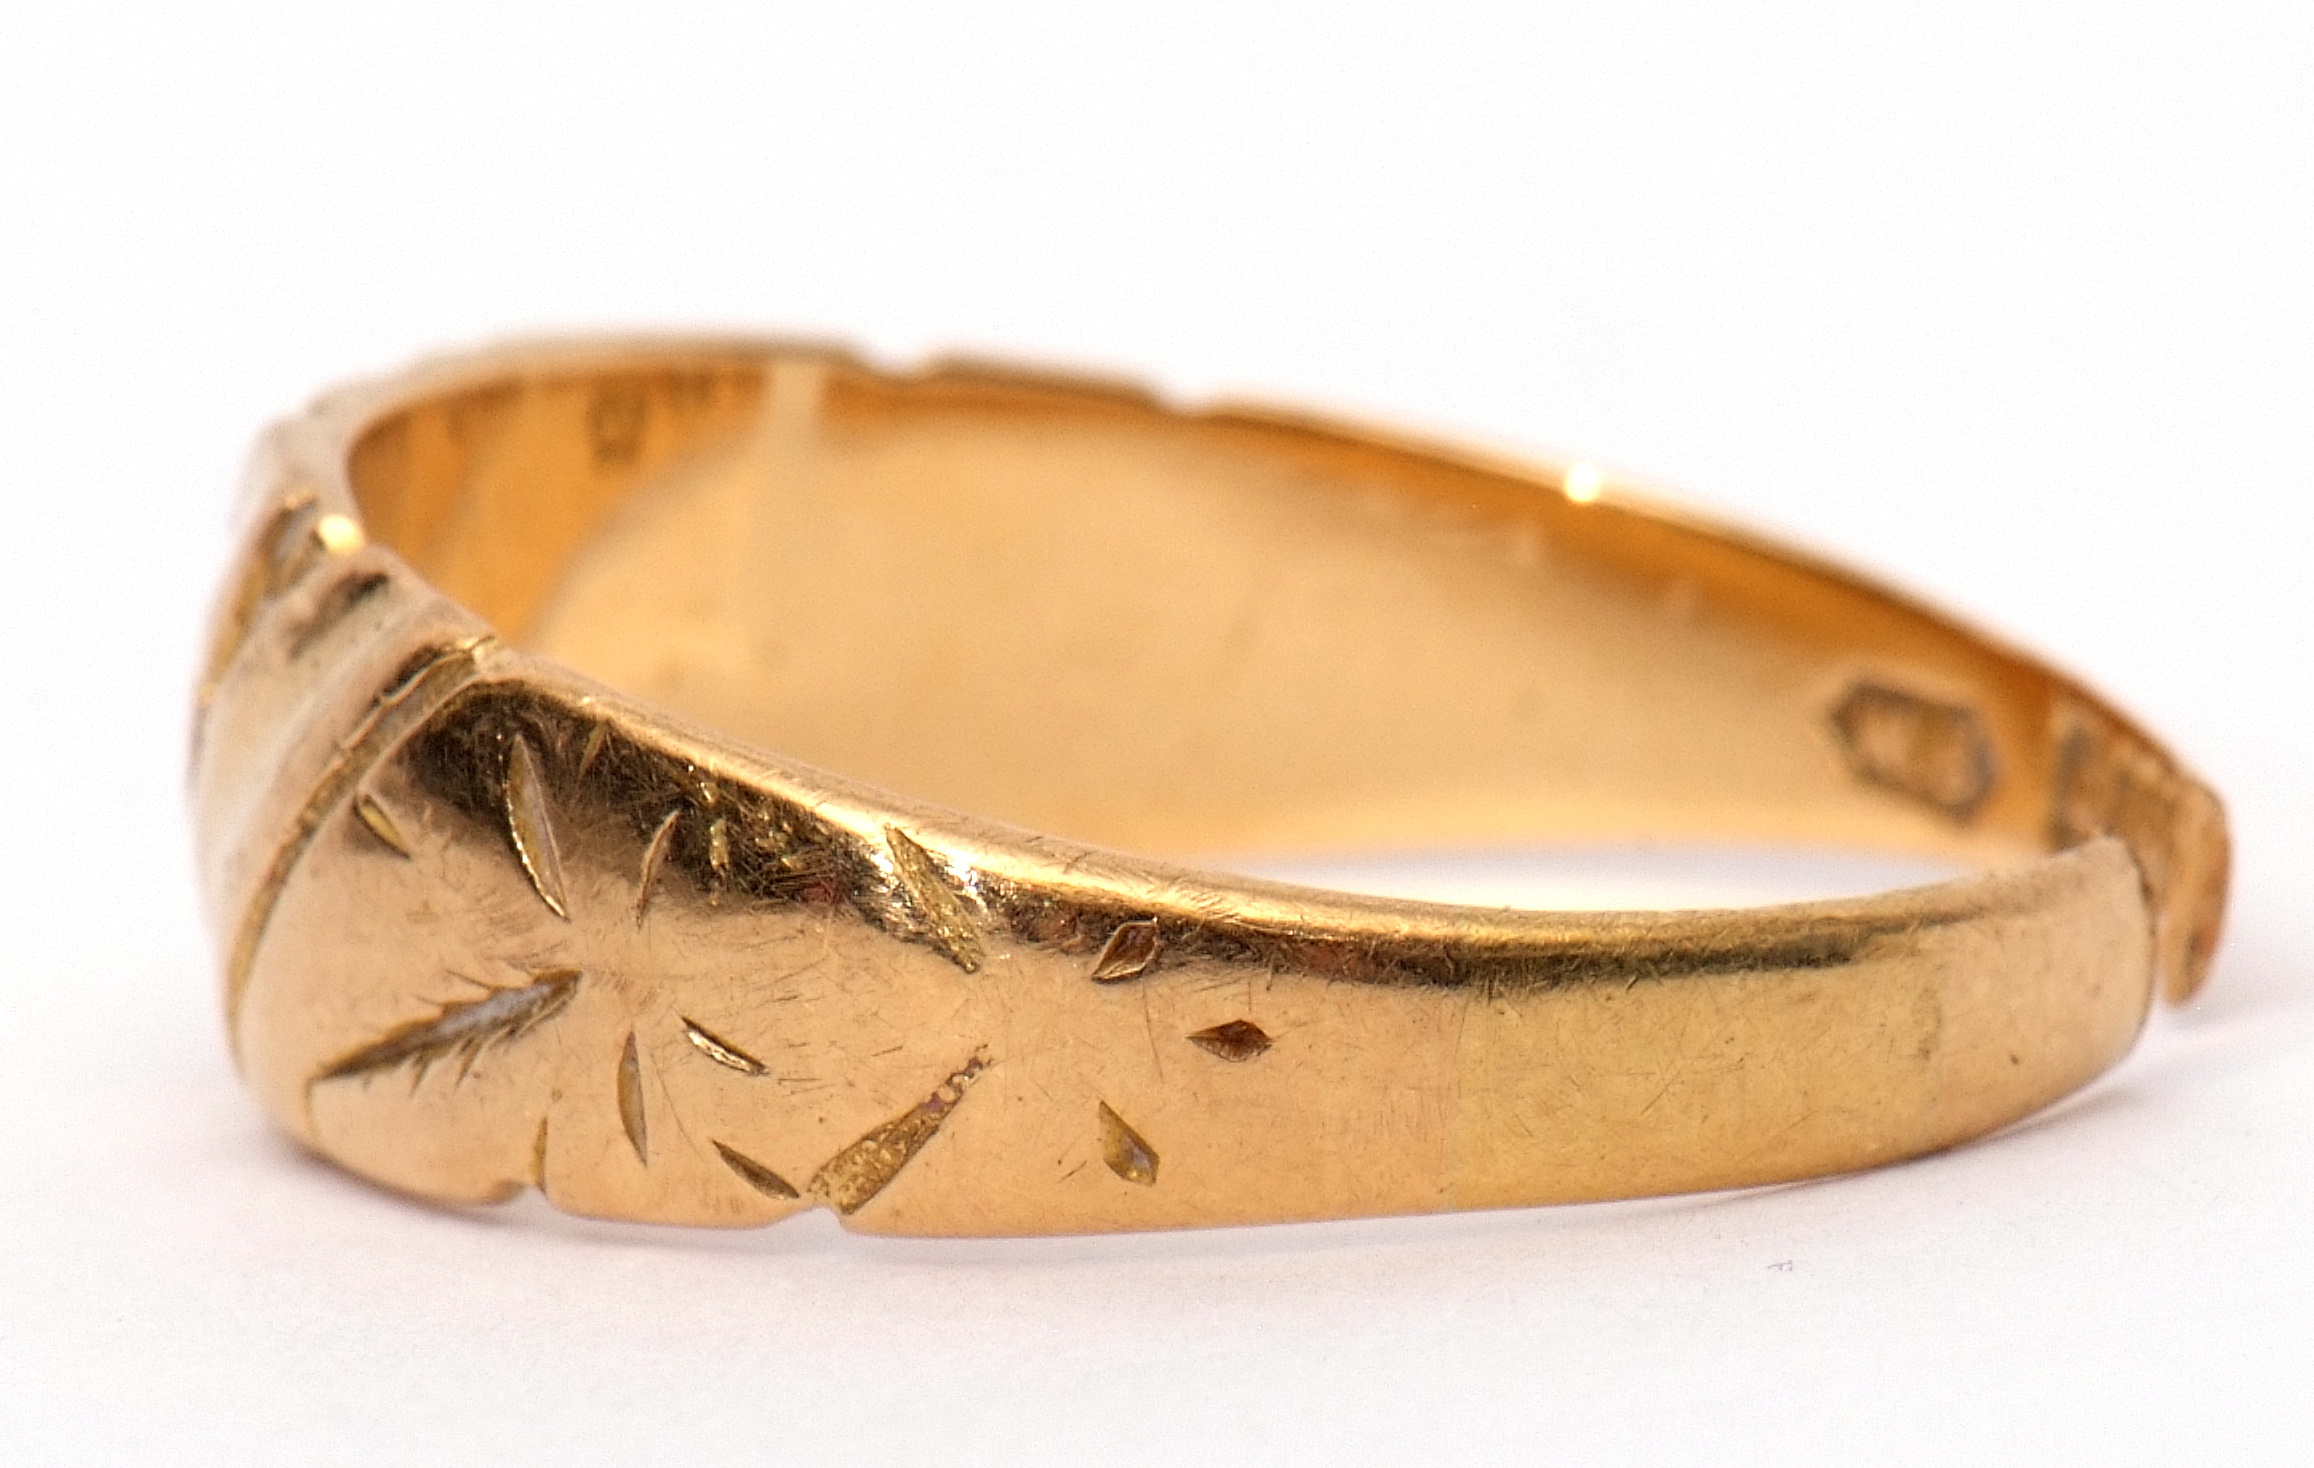 18ct gold ring part chased and engraved detail, Birmingham 1919, 4.8gms, (broken shank) - Image 2 of 6